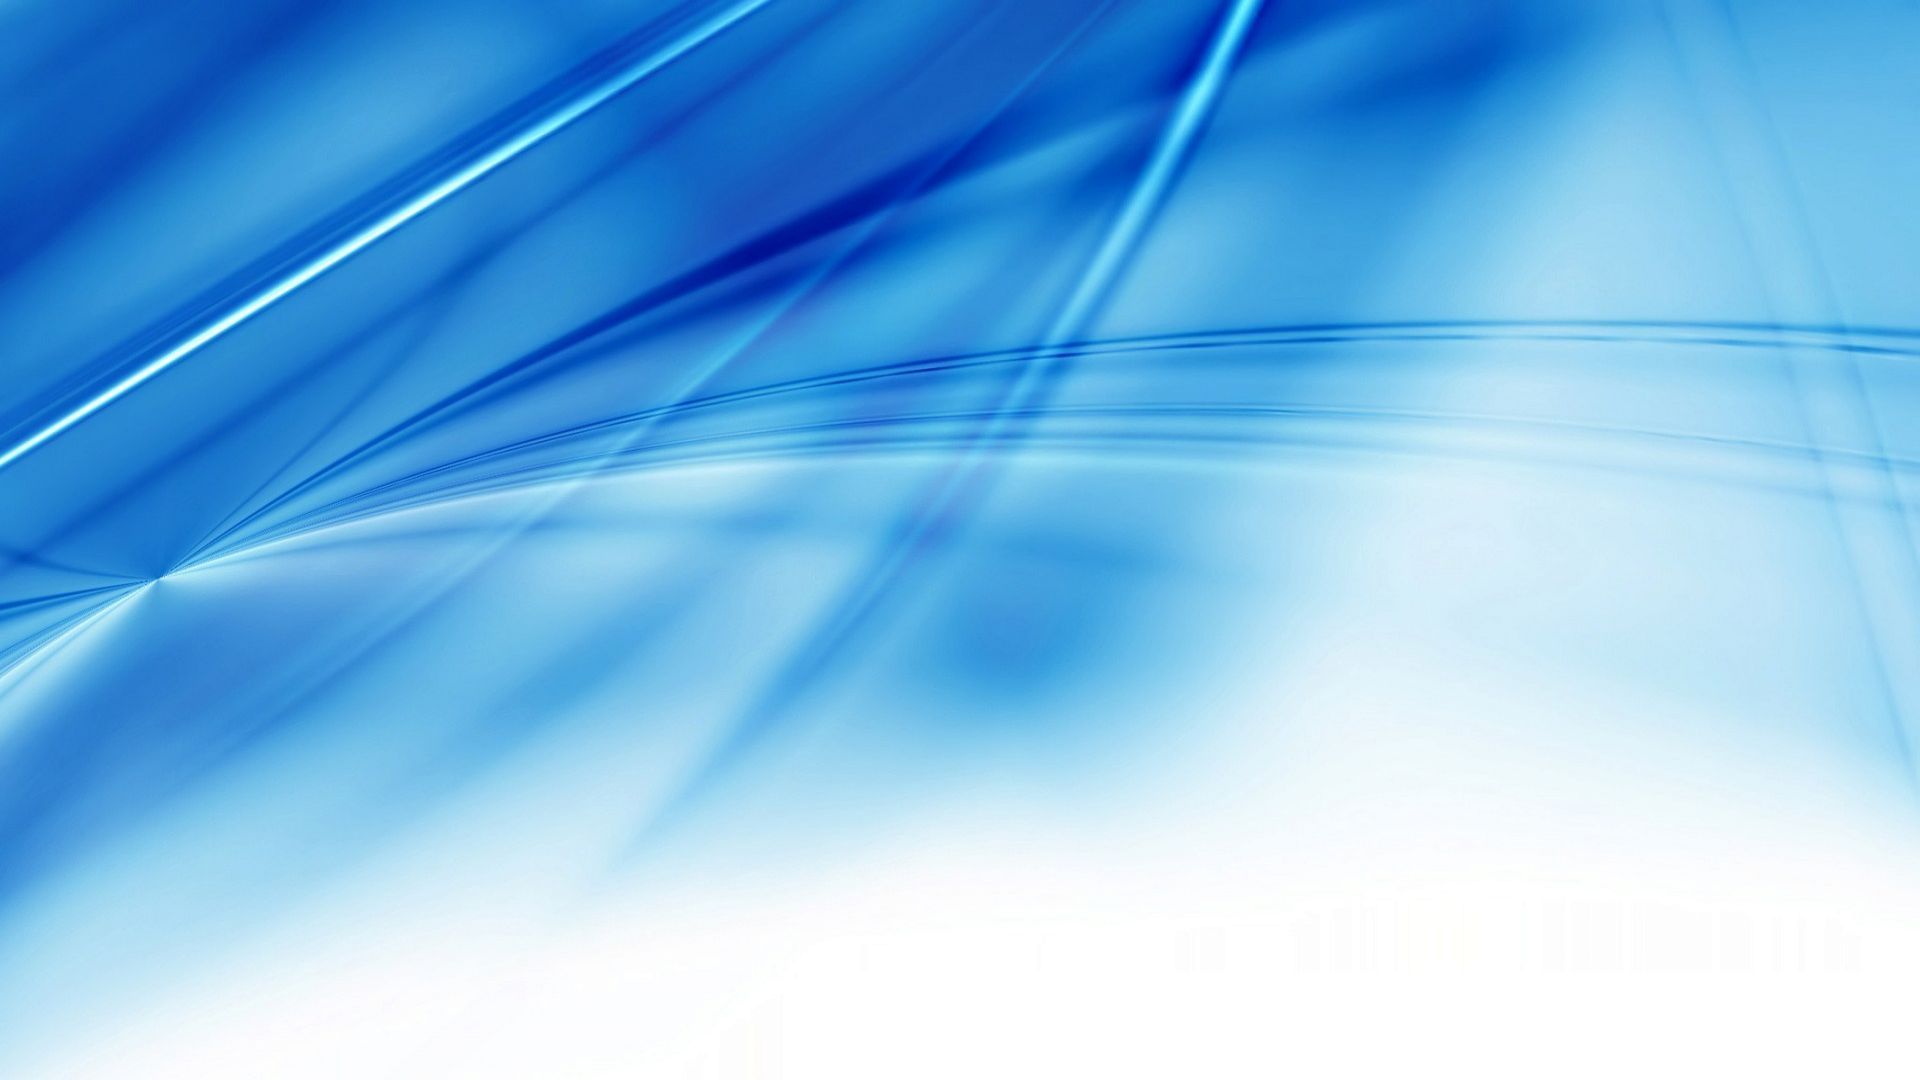 Blue and White Background Wallpapers WIN10 THEMES